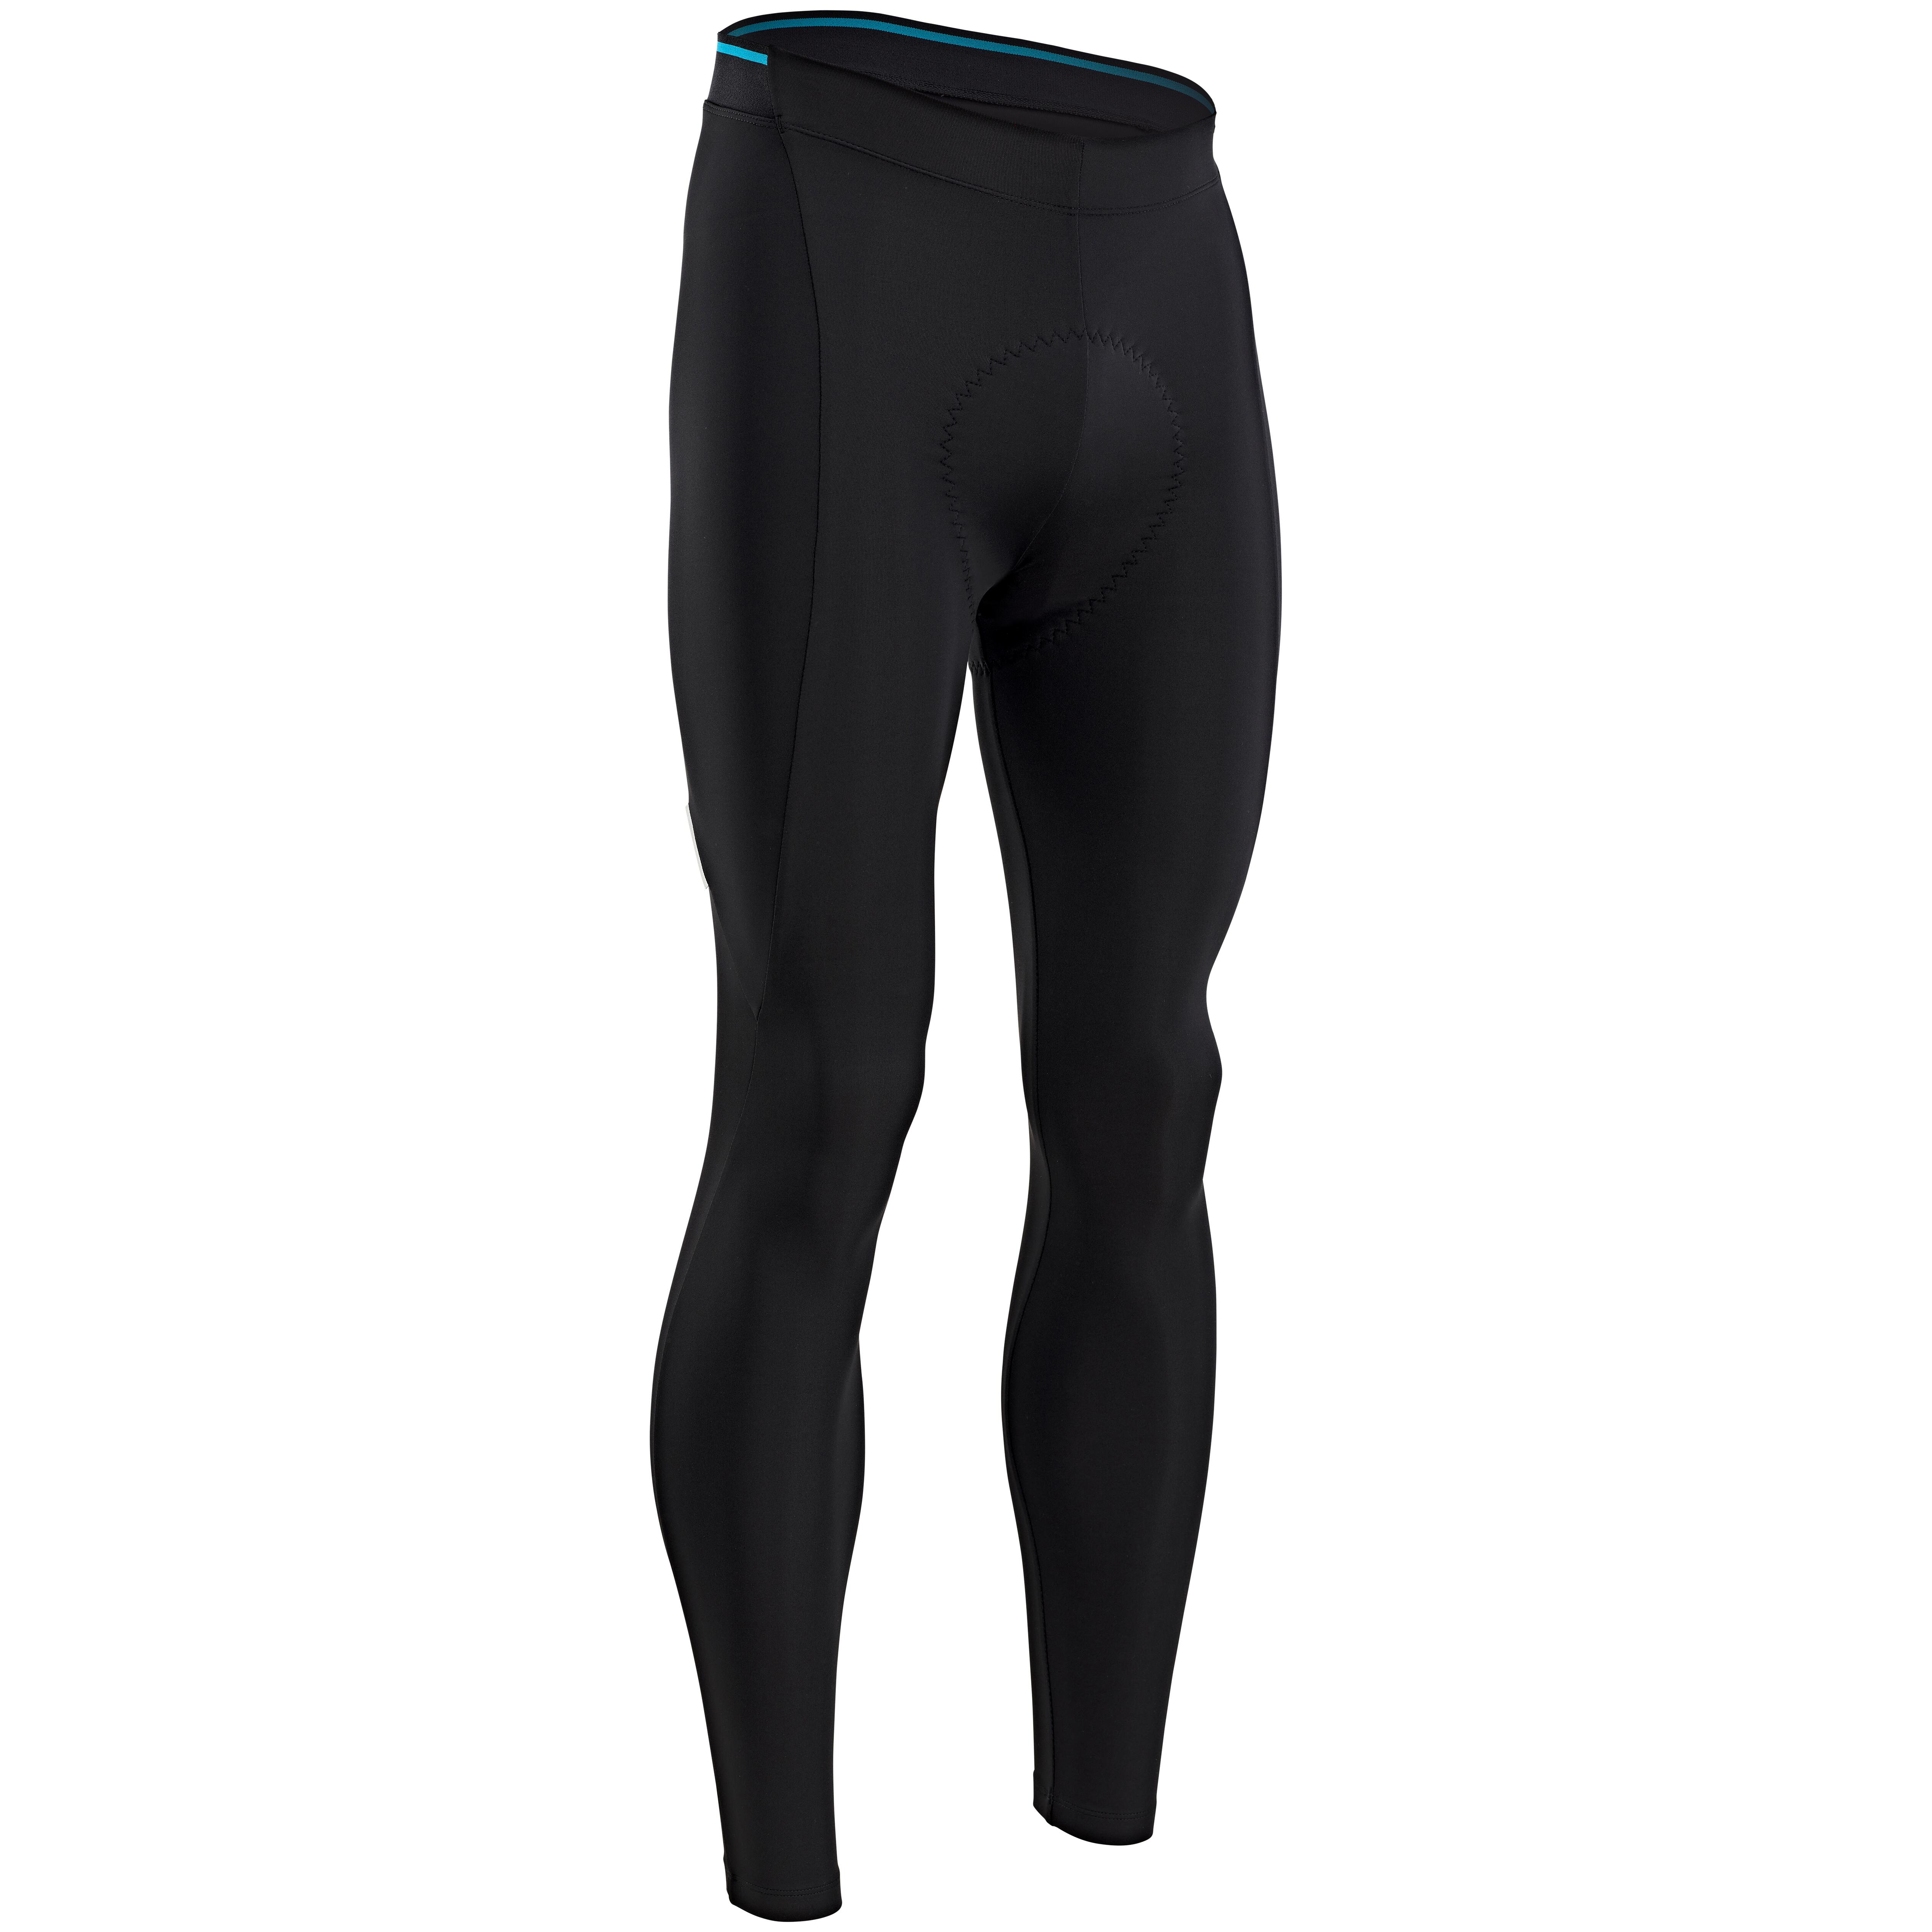 Mens Quick Dry Compression Running Tights 2020 Fitness Leggings For Gym,  Jogging, And Sports Elastic Sportswear Decathlon Trousers Style X0824 From  Fashion_official01, $12.13